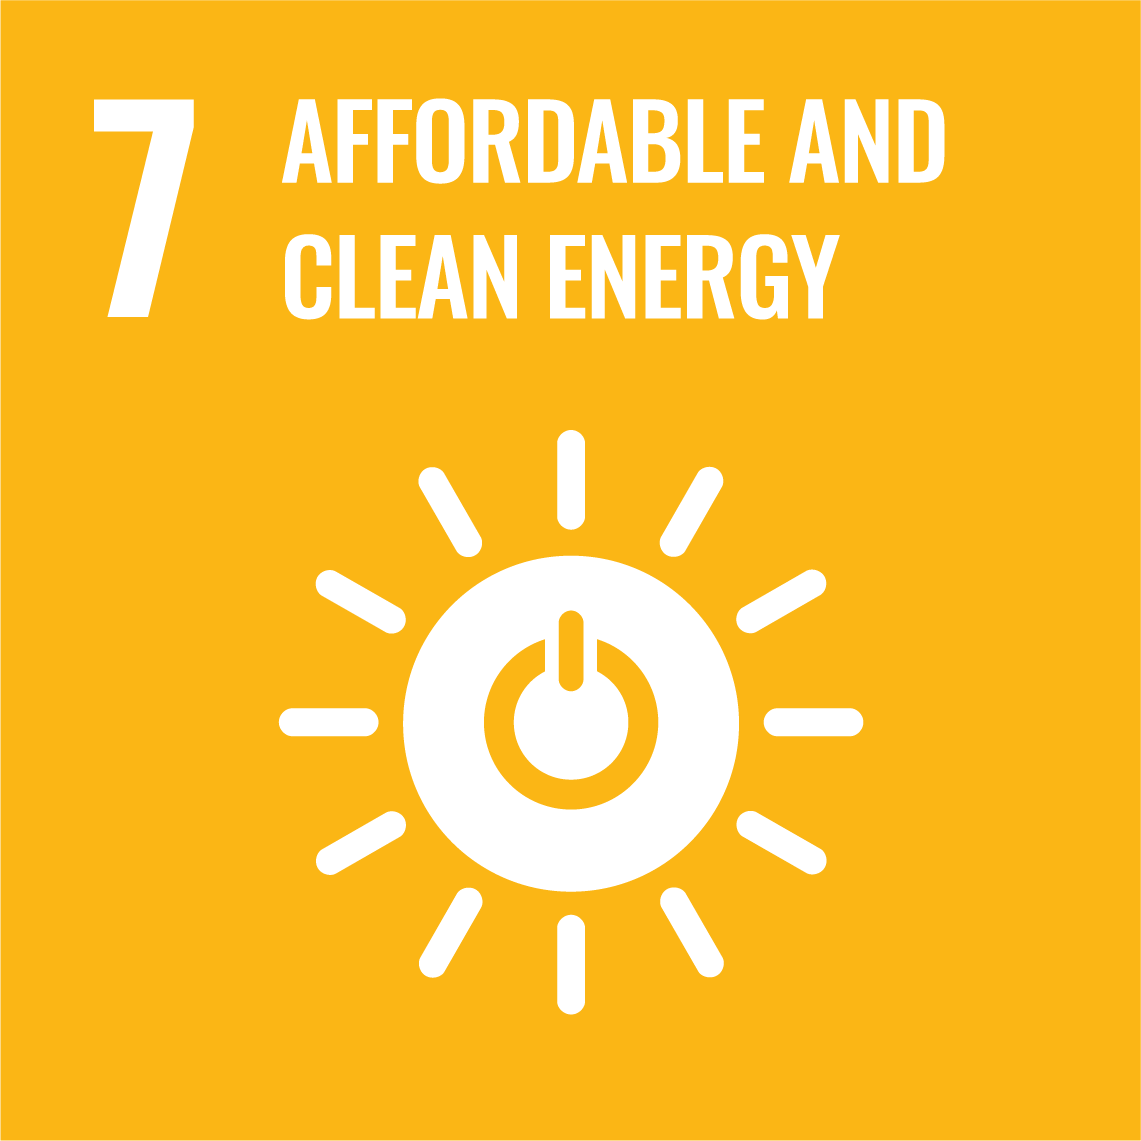 Sustainable Development Goals 7 - Affordable and clean energy